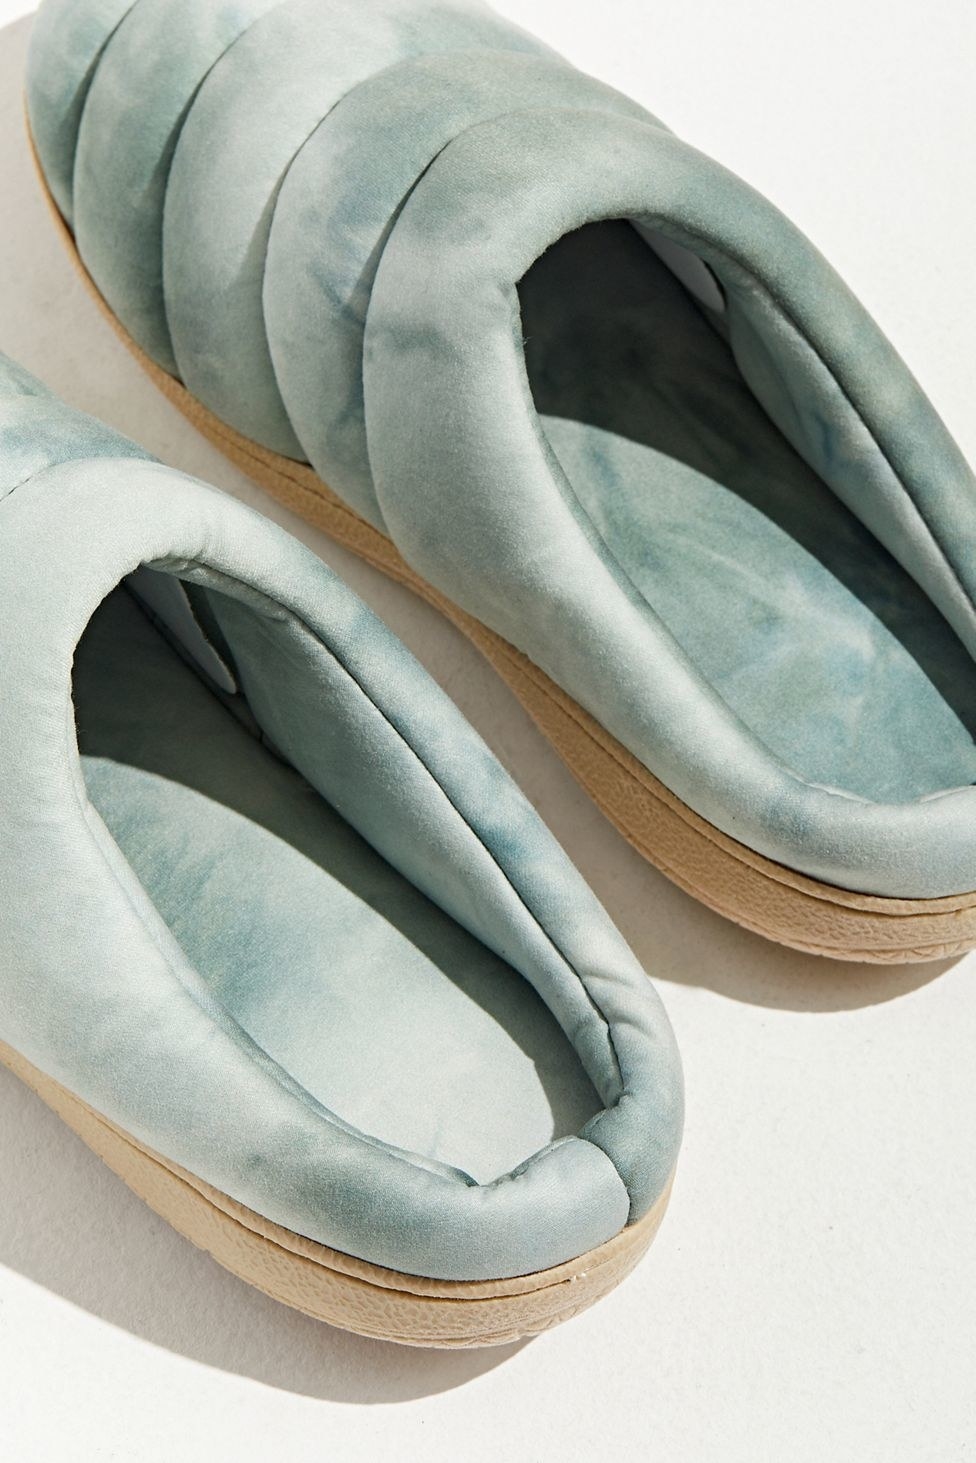 24 Of The Comfiest House Shoes According To Reviewers